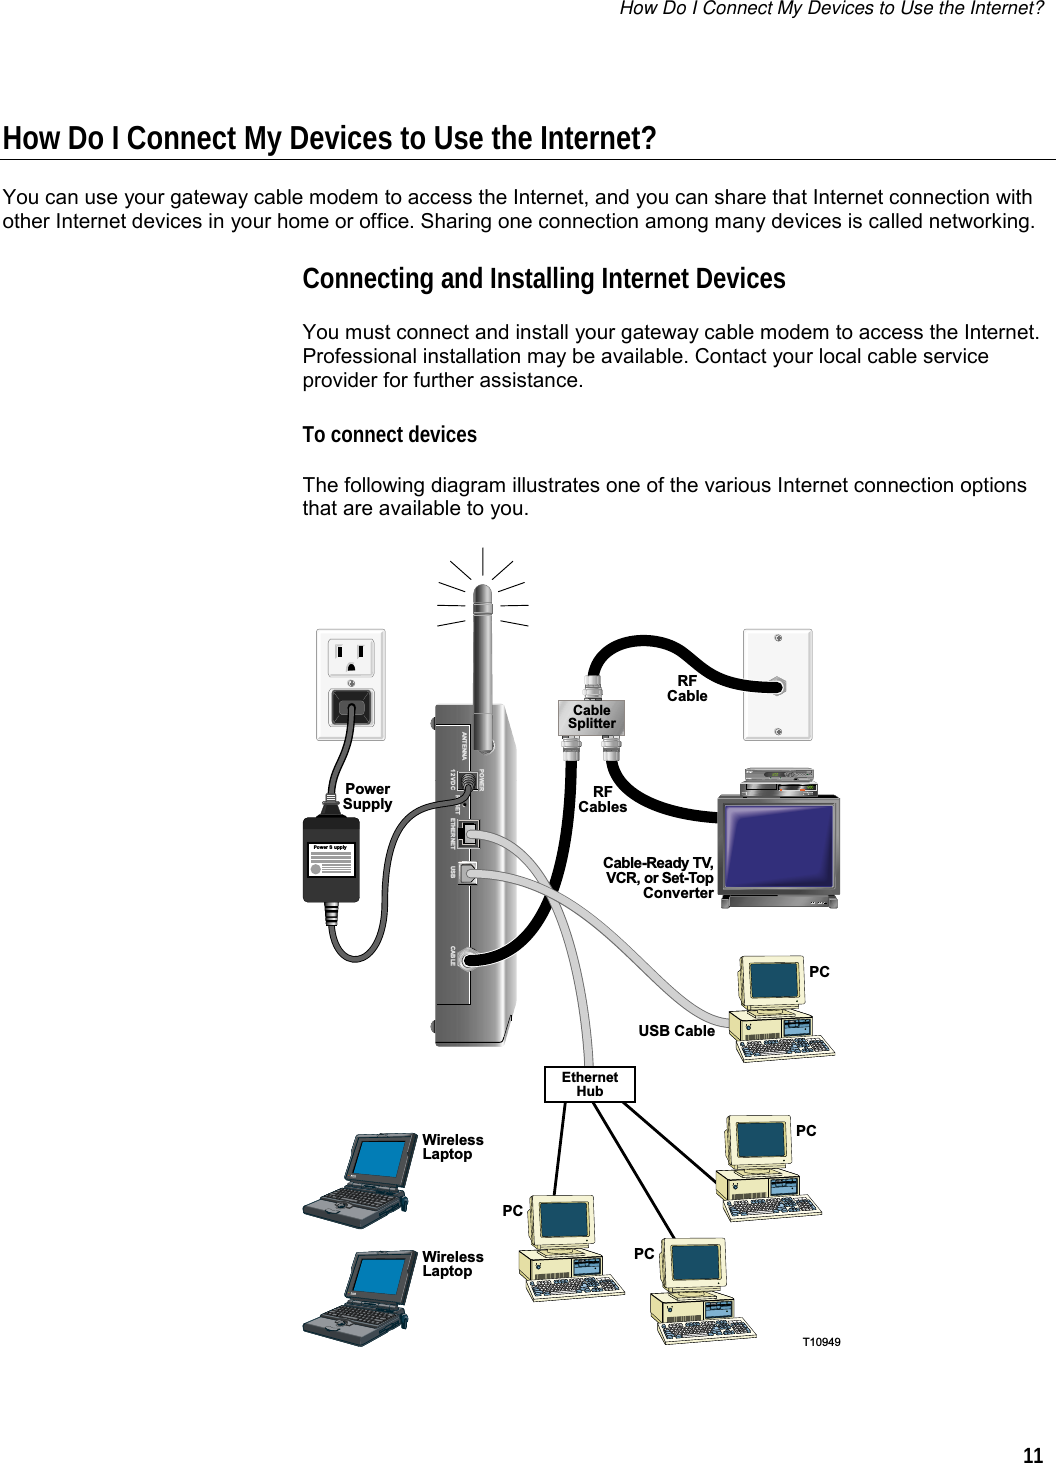 How Do I Connect My Devices to Use the Internet?  11  How Do I Connect My Devices to Use the Internet? You can use your gateway cable modem to access the Internet, and you can share that Internet connection with other Internet devices in your home or office. Sharing one connection among many devices is called networking.  Connecting and Installing Internet Devices You must connect and install your gateway cable modem to access the Internet. Professional installation may be available. Contact your local cable service provider for further assistance. To connect devices The following diagram illustrates one of the various Internet connection options that are available to you. POWERANTENNA12 VDC RESET ETHERNET CABLEUSBPowerSupplyCable-Ready TV, VCR, or Set-TopConverterPCUSB CableRFCableRFCablesCable SplitterT10949Power SupplyBYPASSVOLñVOL+CH+CHñMENU GUIDE INFO A/B POWEREthernetHubPCPCWirelessLaptopPCWirelessLaptop   